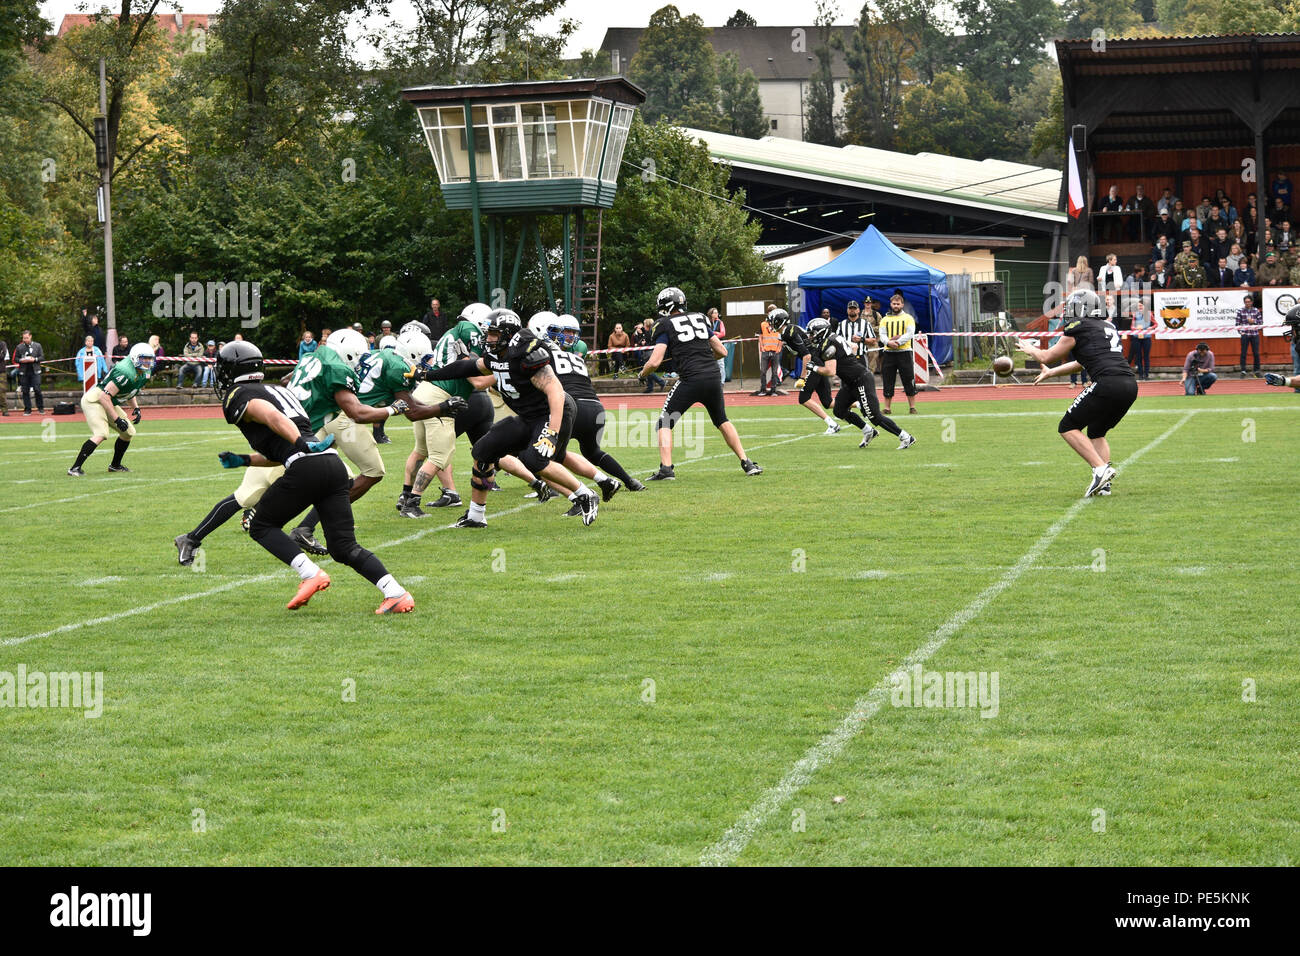 Offensive players from the Prague Black Panthers run a play against defensive players from the 2nd Cavalry Regiment's football team during their game in Cesky Krumlov, Czech Republic, Sept. 26, 2015. The team participated in an American football game with the local Czech Republic semi-professional football team as the unit helped to commemorate the 70th anniversary of Cesky Krumlov's liberation during World War II while also demonstrating the U.S. commitment to their NATO and Czech allies. (U.S. Army photo by Sgt. William A. Tanner/released) Stock Photo